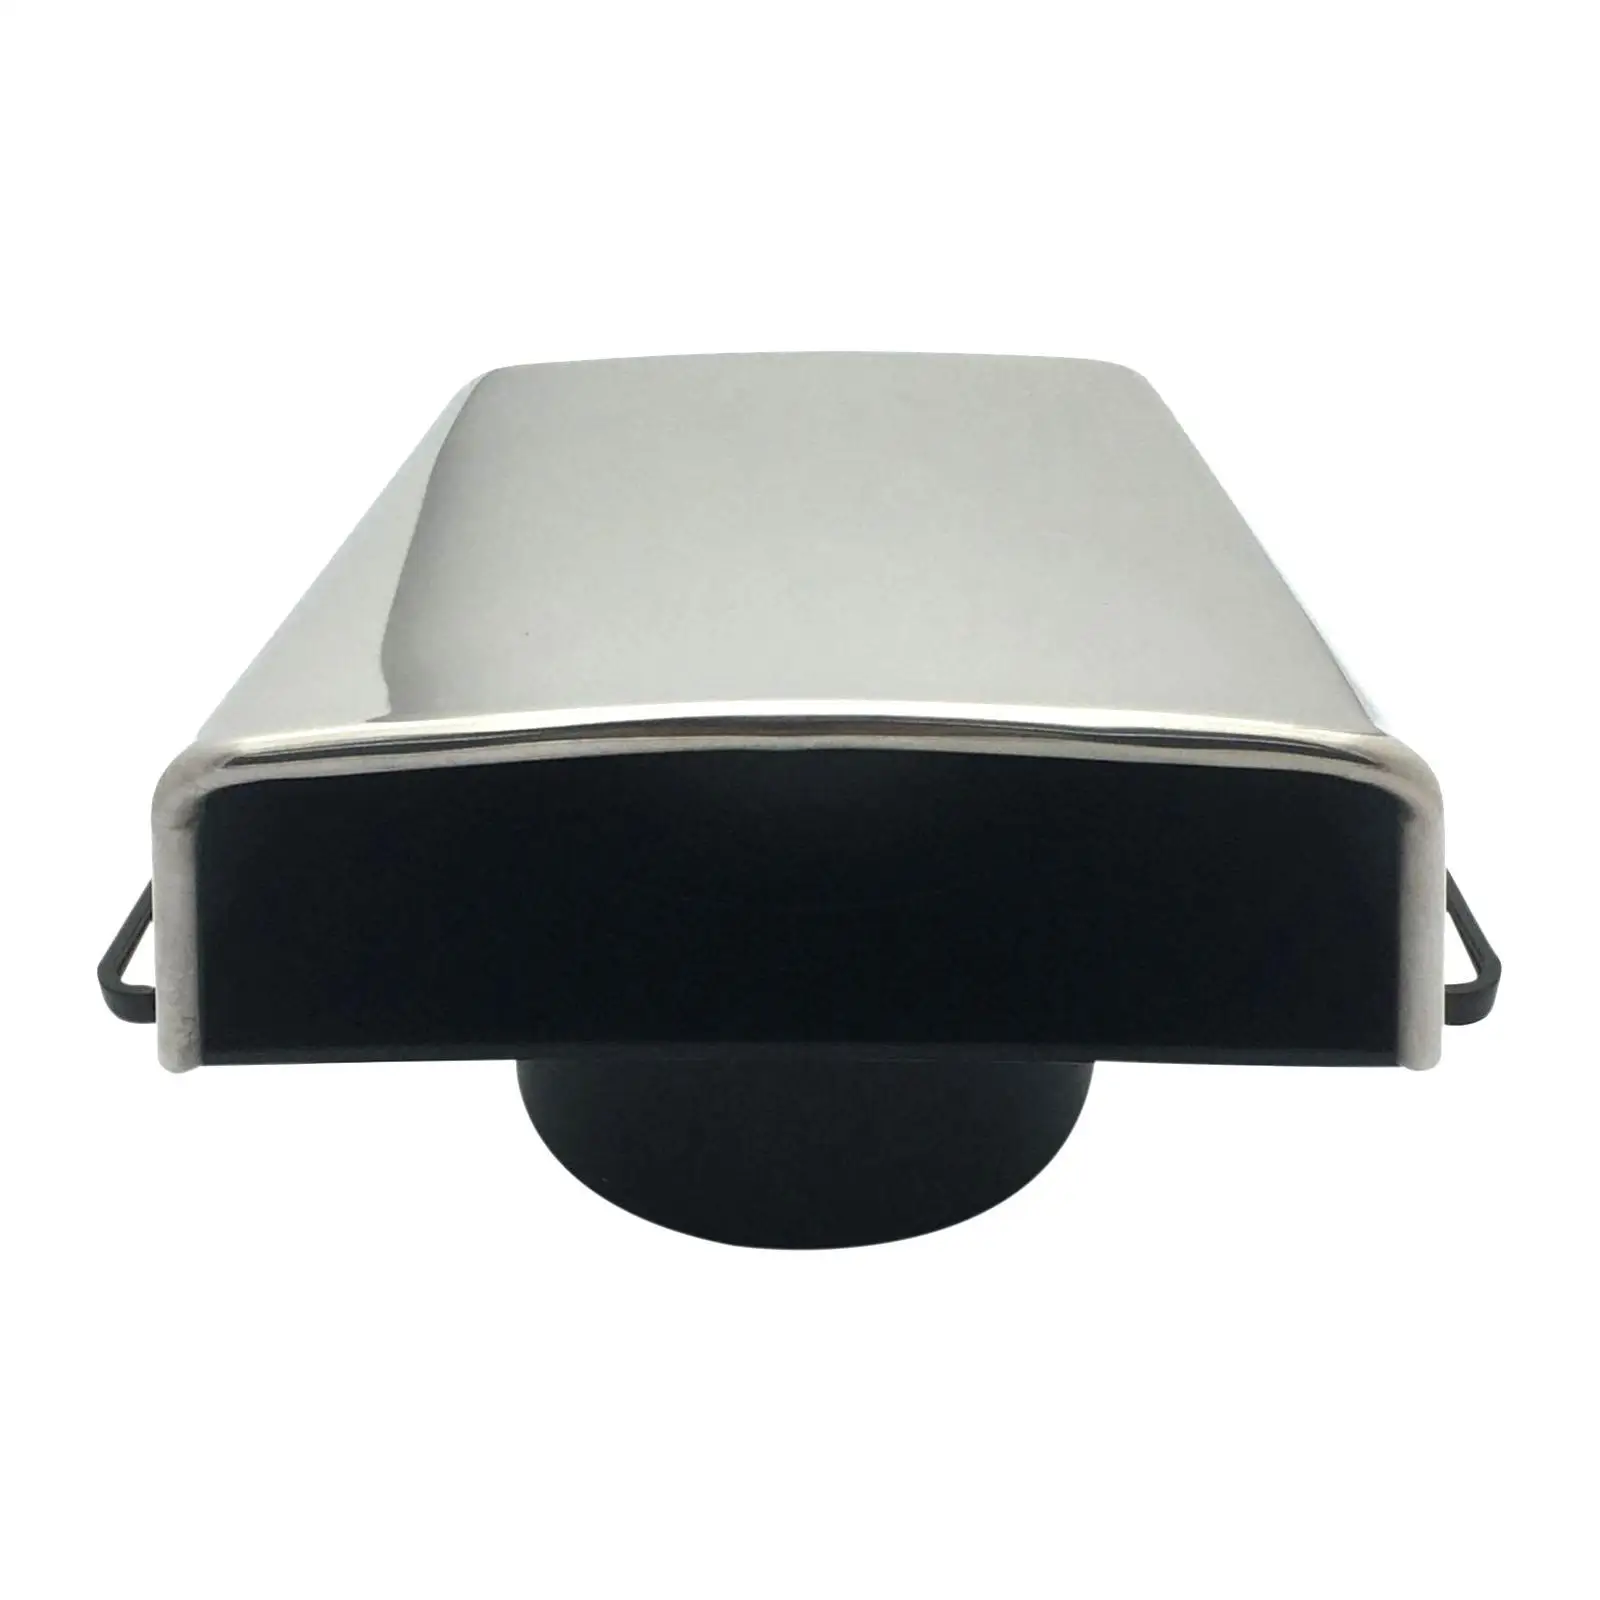  with Nylon Base Intake and Exhaust Cowl Ventilator for Boat Yacht Remove Odor 147.4x123x72mm Good Ventilation